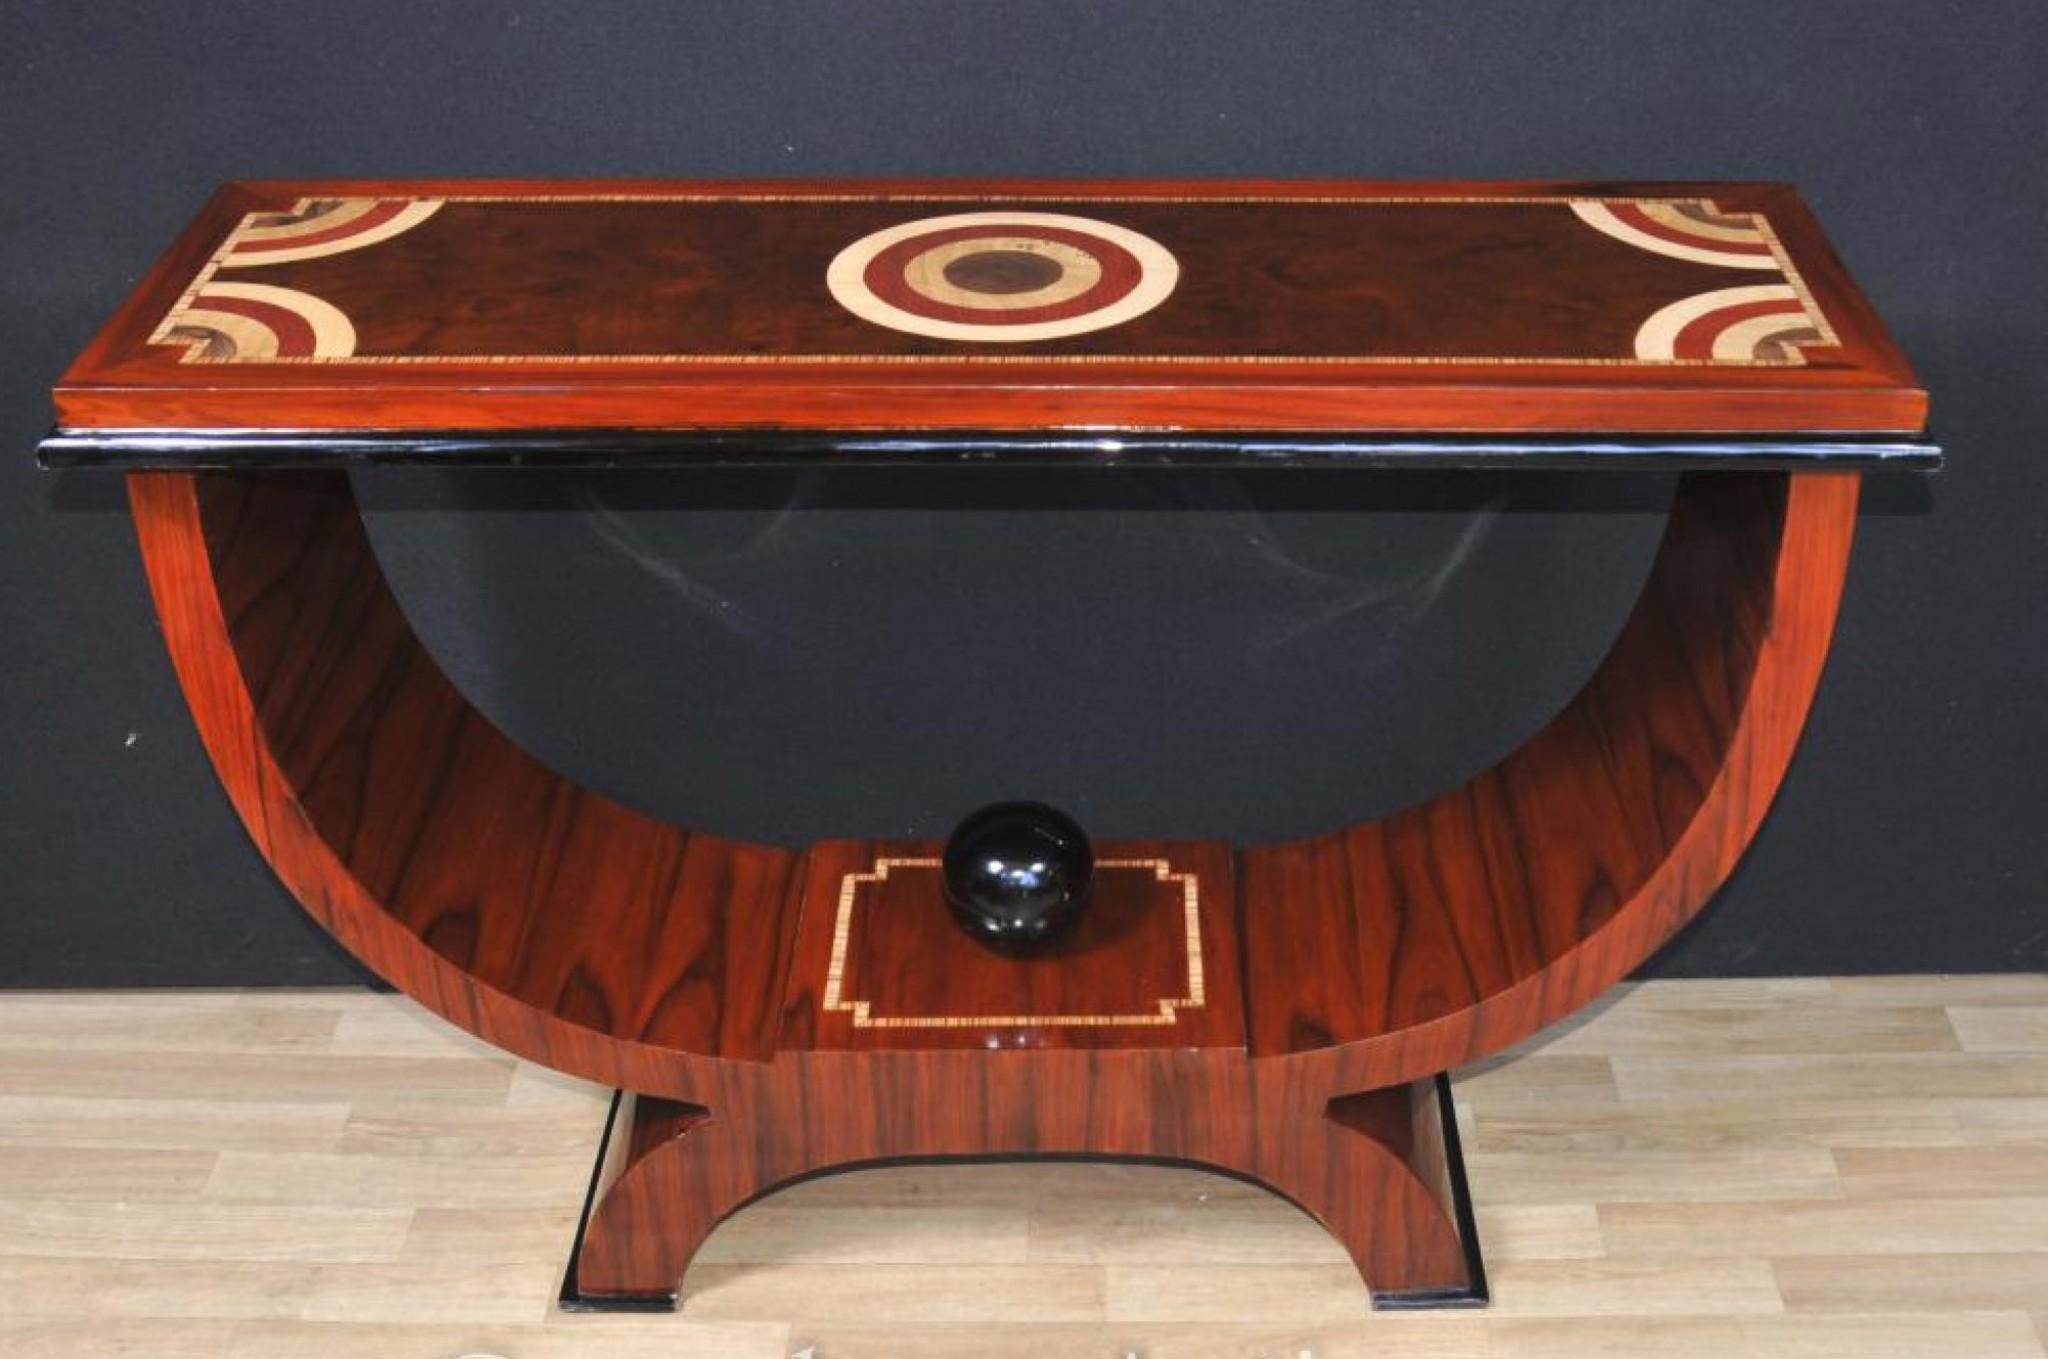 Stunning Art Deco style console table in rosewood
Gorgeous piece somehow epitomize the 1920s aesthetic
Perfect complement to any high end interiors scheme
Love the concentric inlay motifs to the table top, very stylish
Offered in great shape